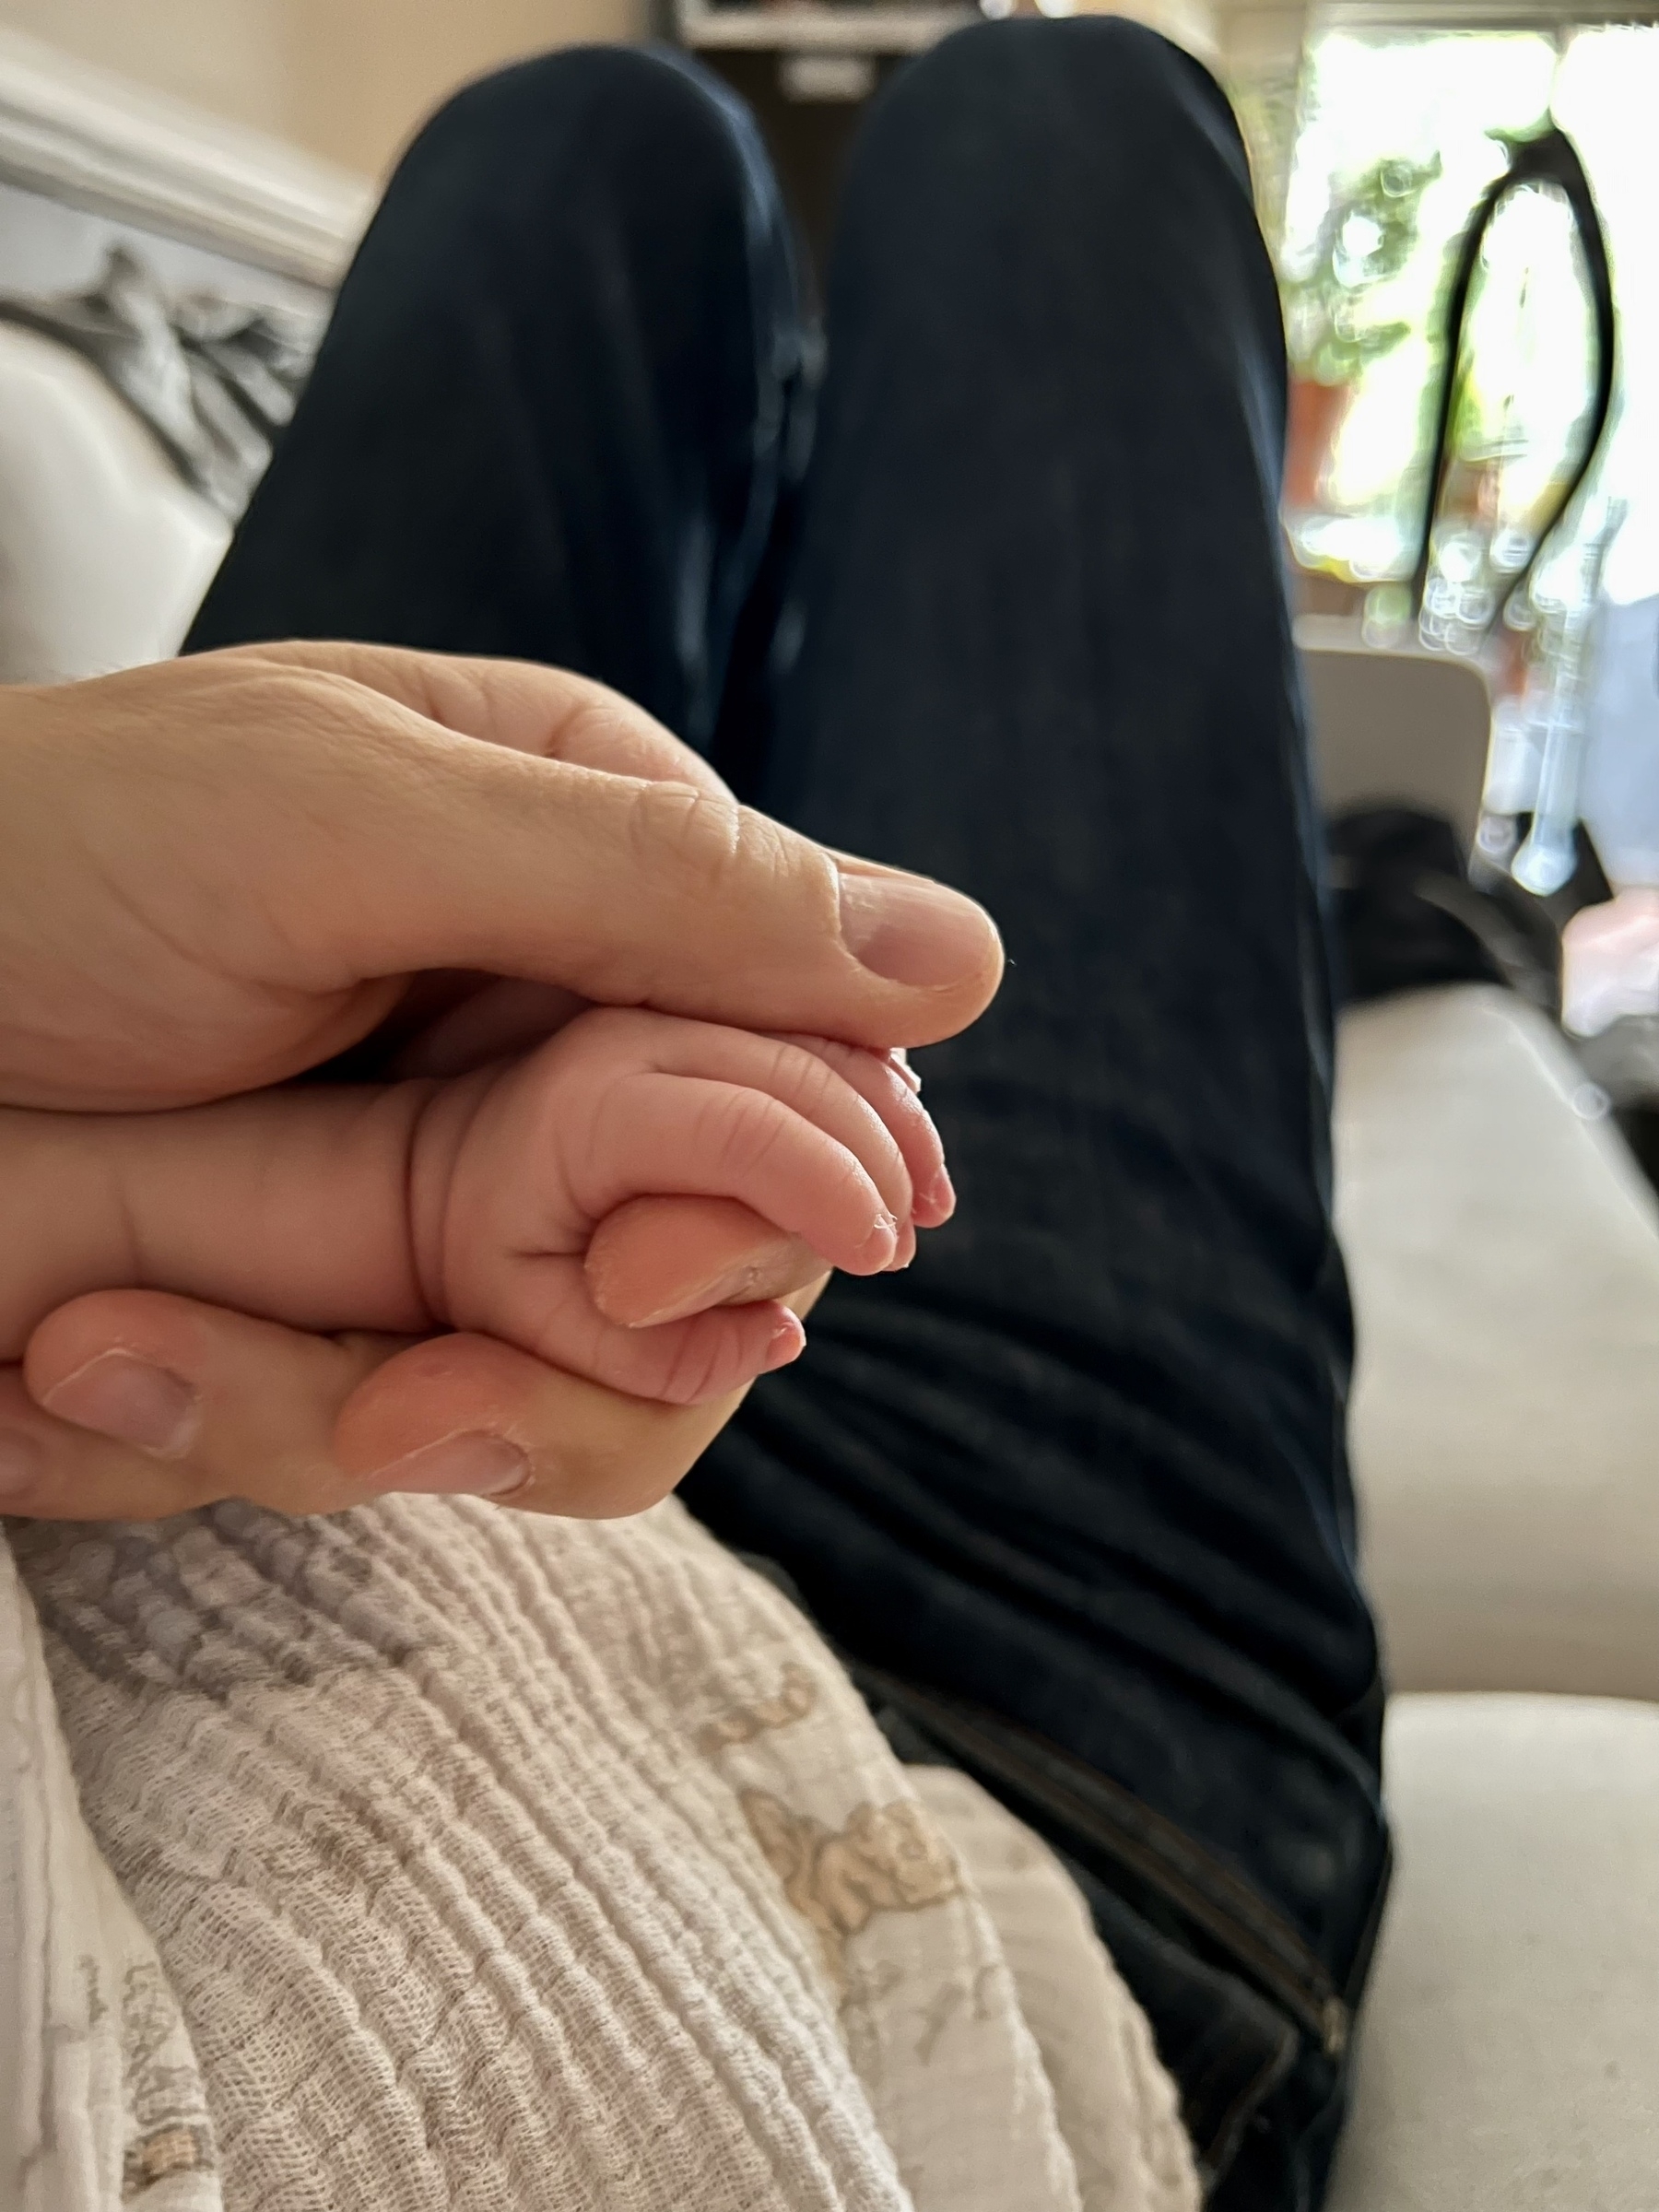 Adult holding baby's hand